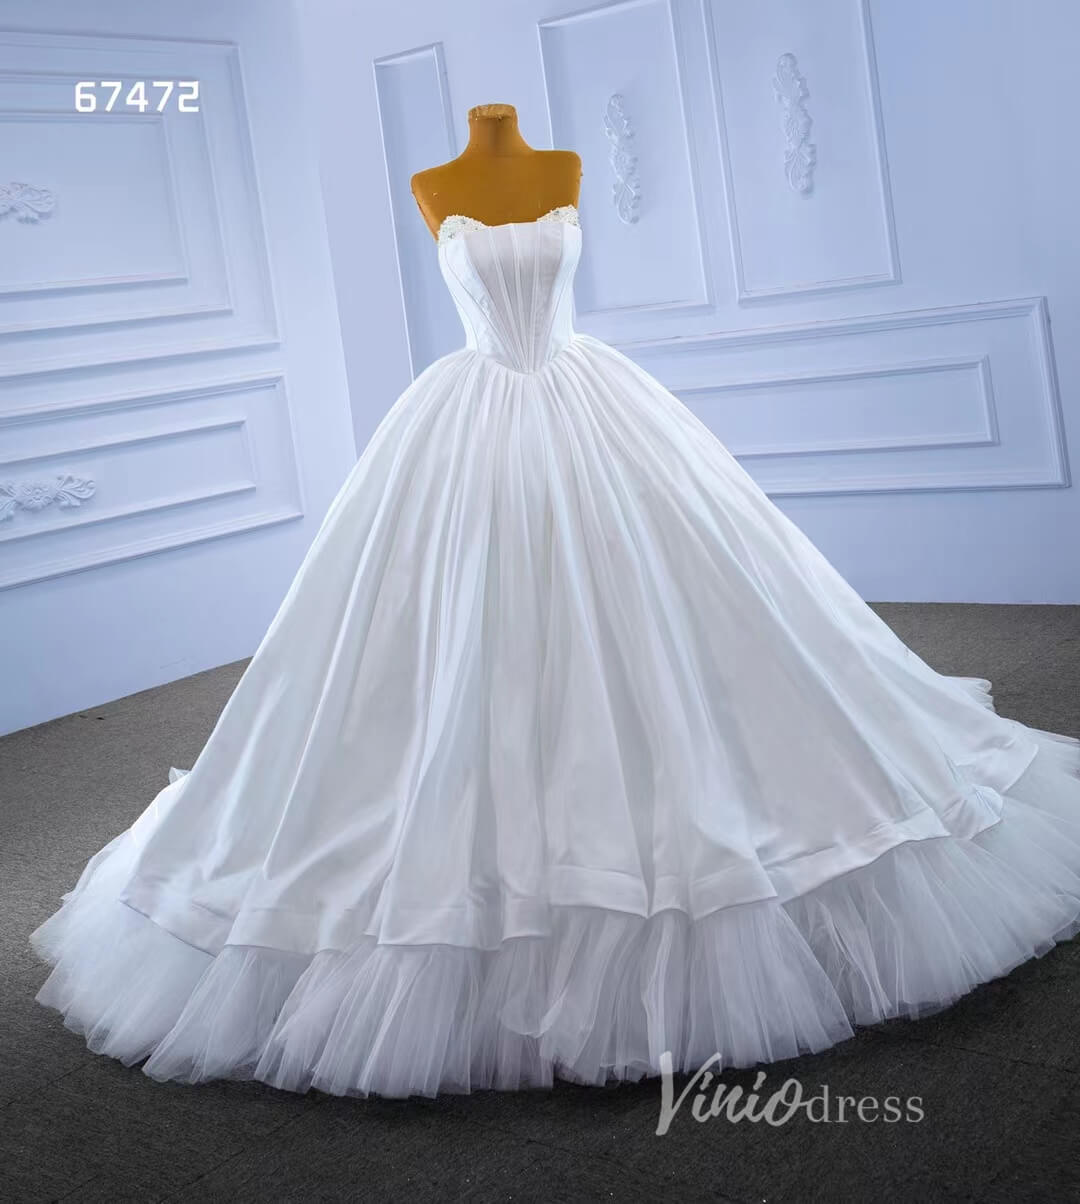 Simple White Ball Gown Wedding Dresses Strapless Corset Dress 67472-wedding dresses-Viniodress-Viniodress